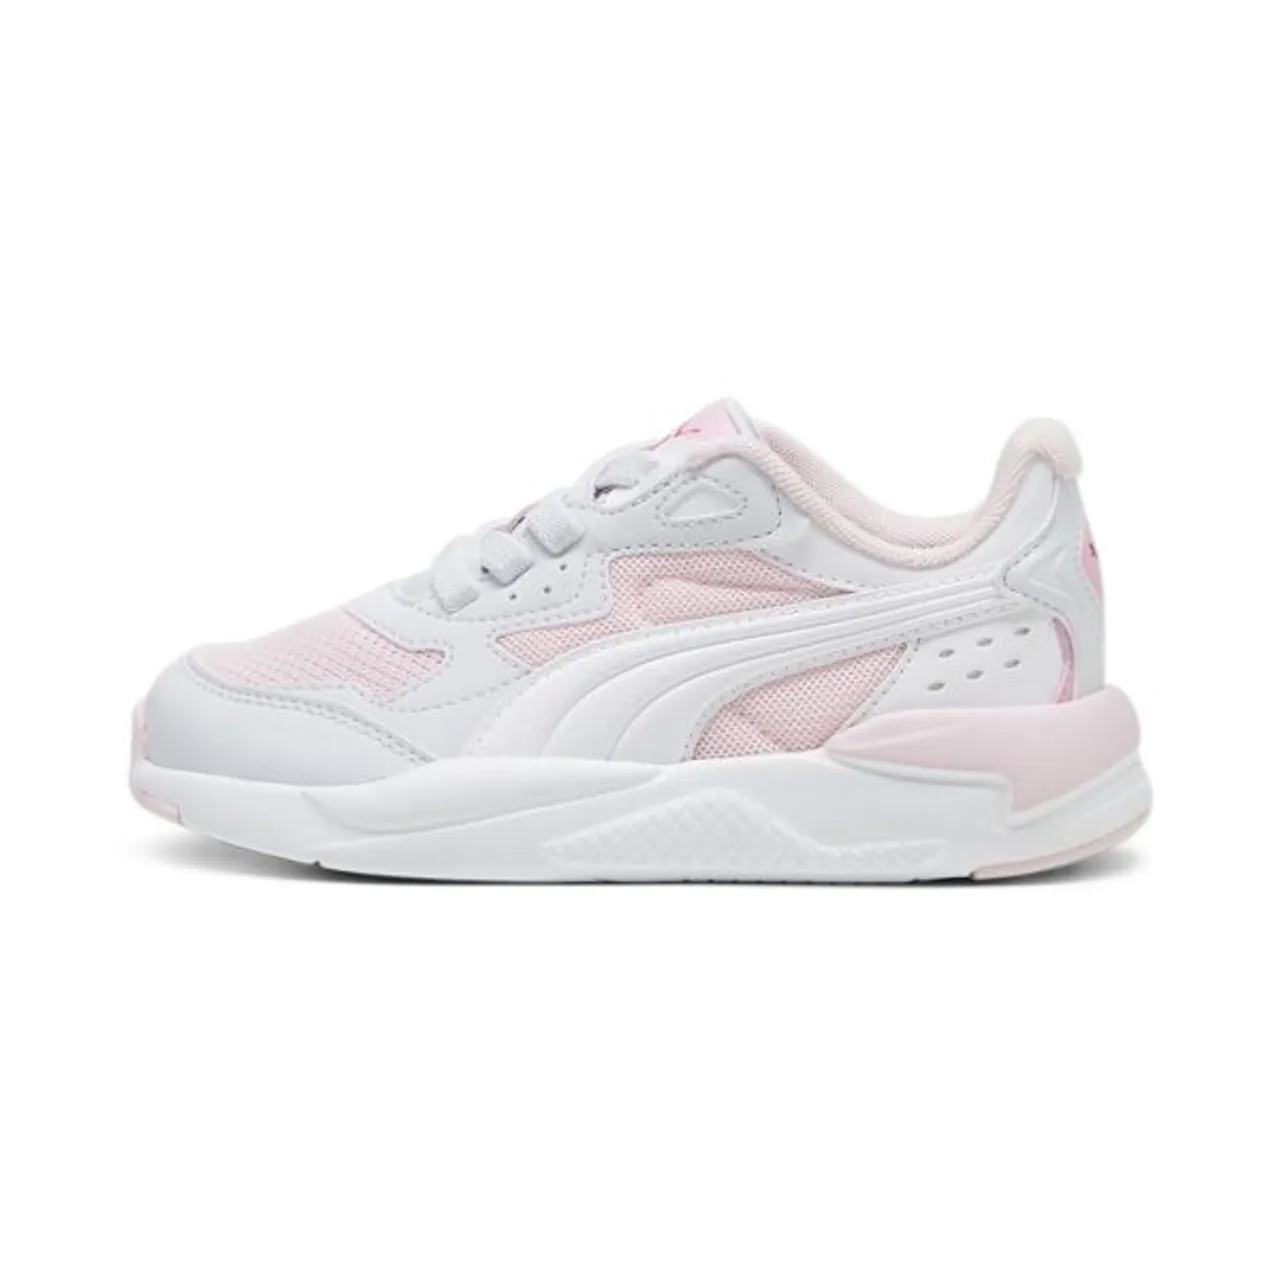 Sneaker PUMA "X-Ray Speed AC Sneakers Kinder" Gr. 29, pink (whisp of white silver mist gray) Kinder Schuhe Trainingsschuhe